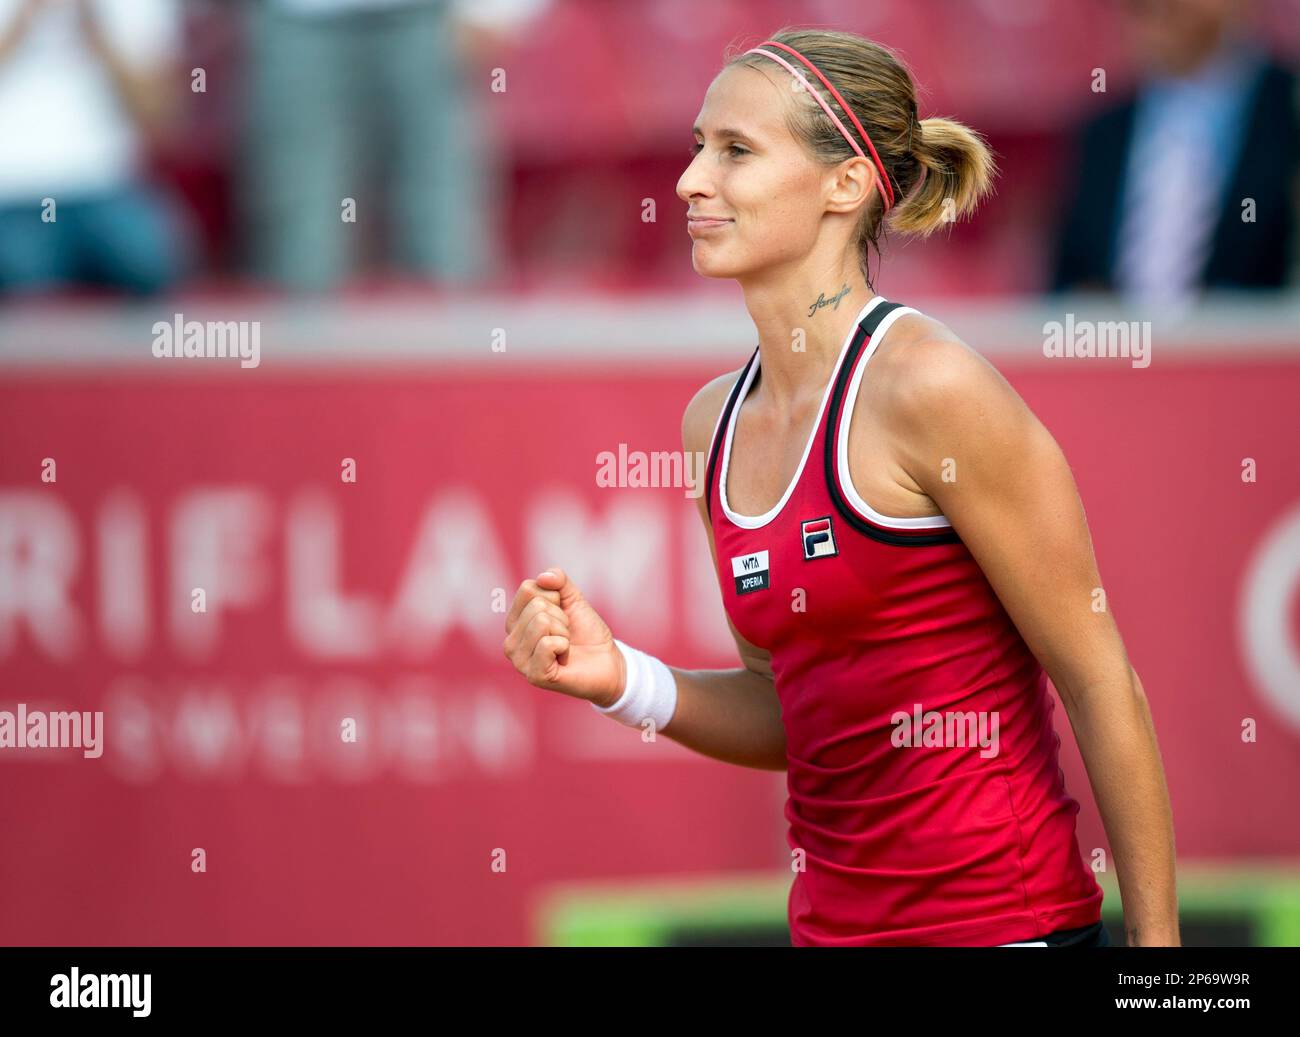 Polona Hercog of Slovenia reacts during the the Sony Swedish Open tennis tournament final in Bastad, Sweden, on Sunday July 22, 2012